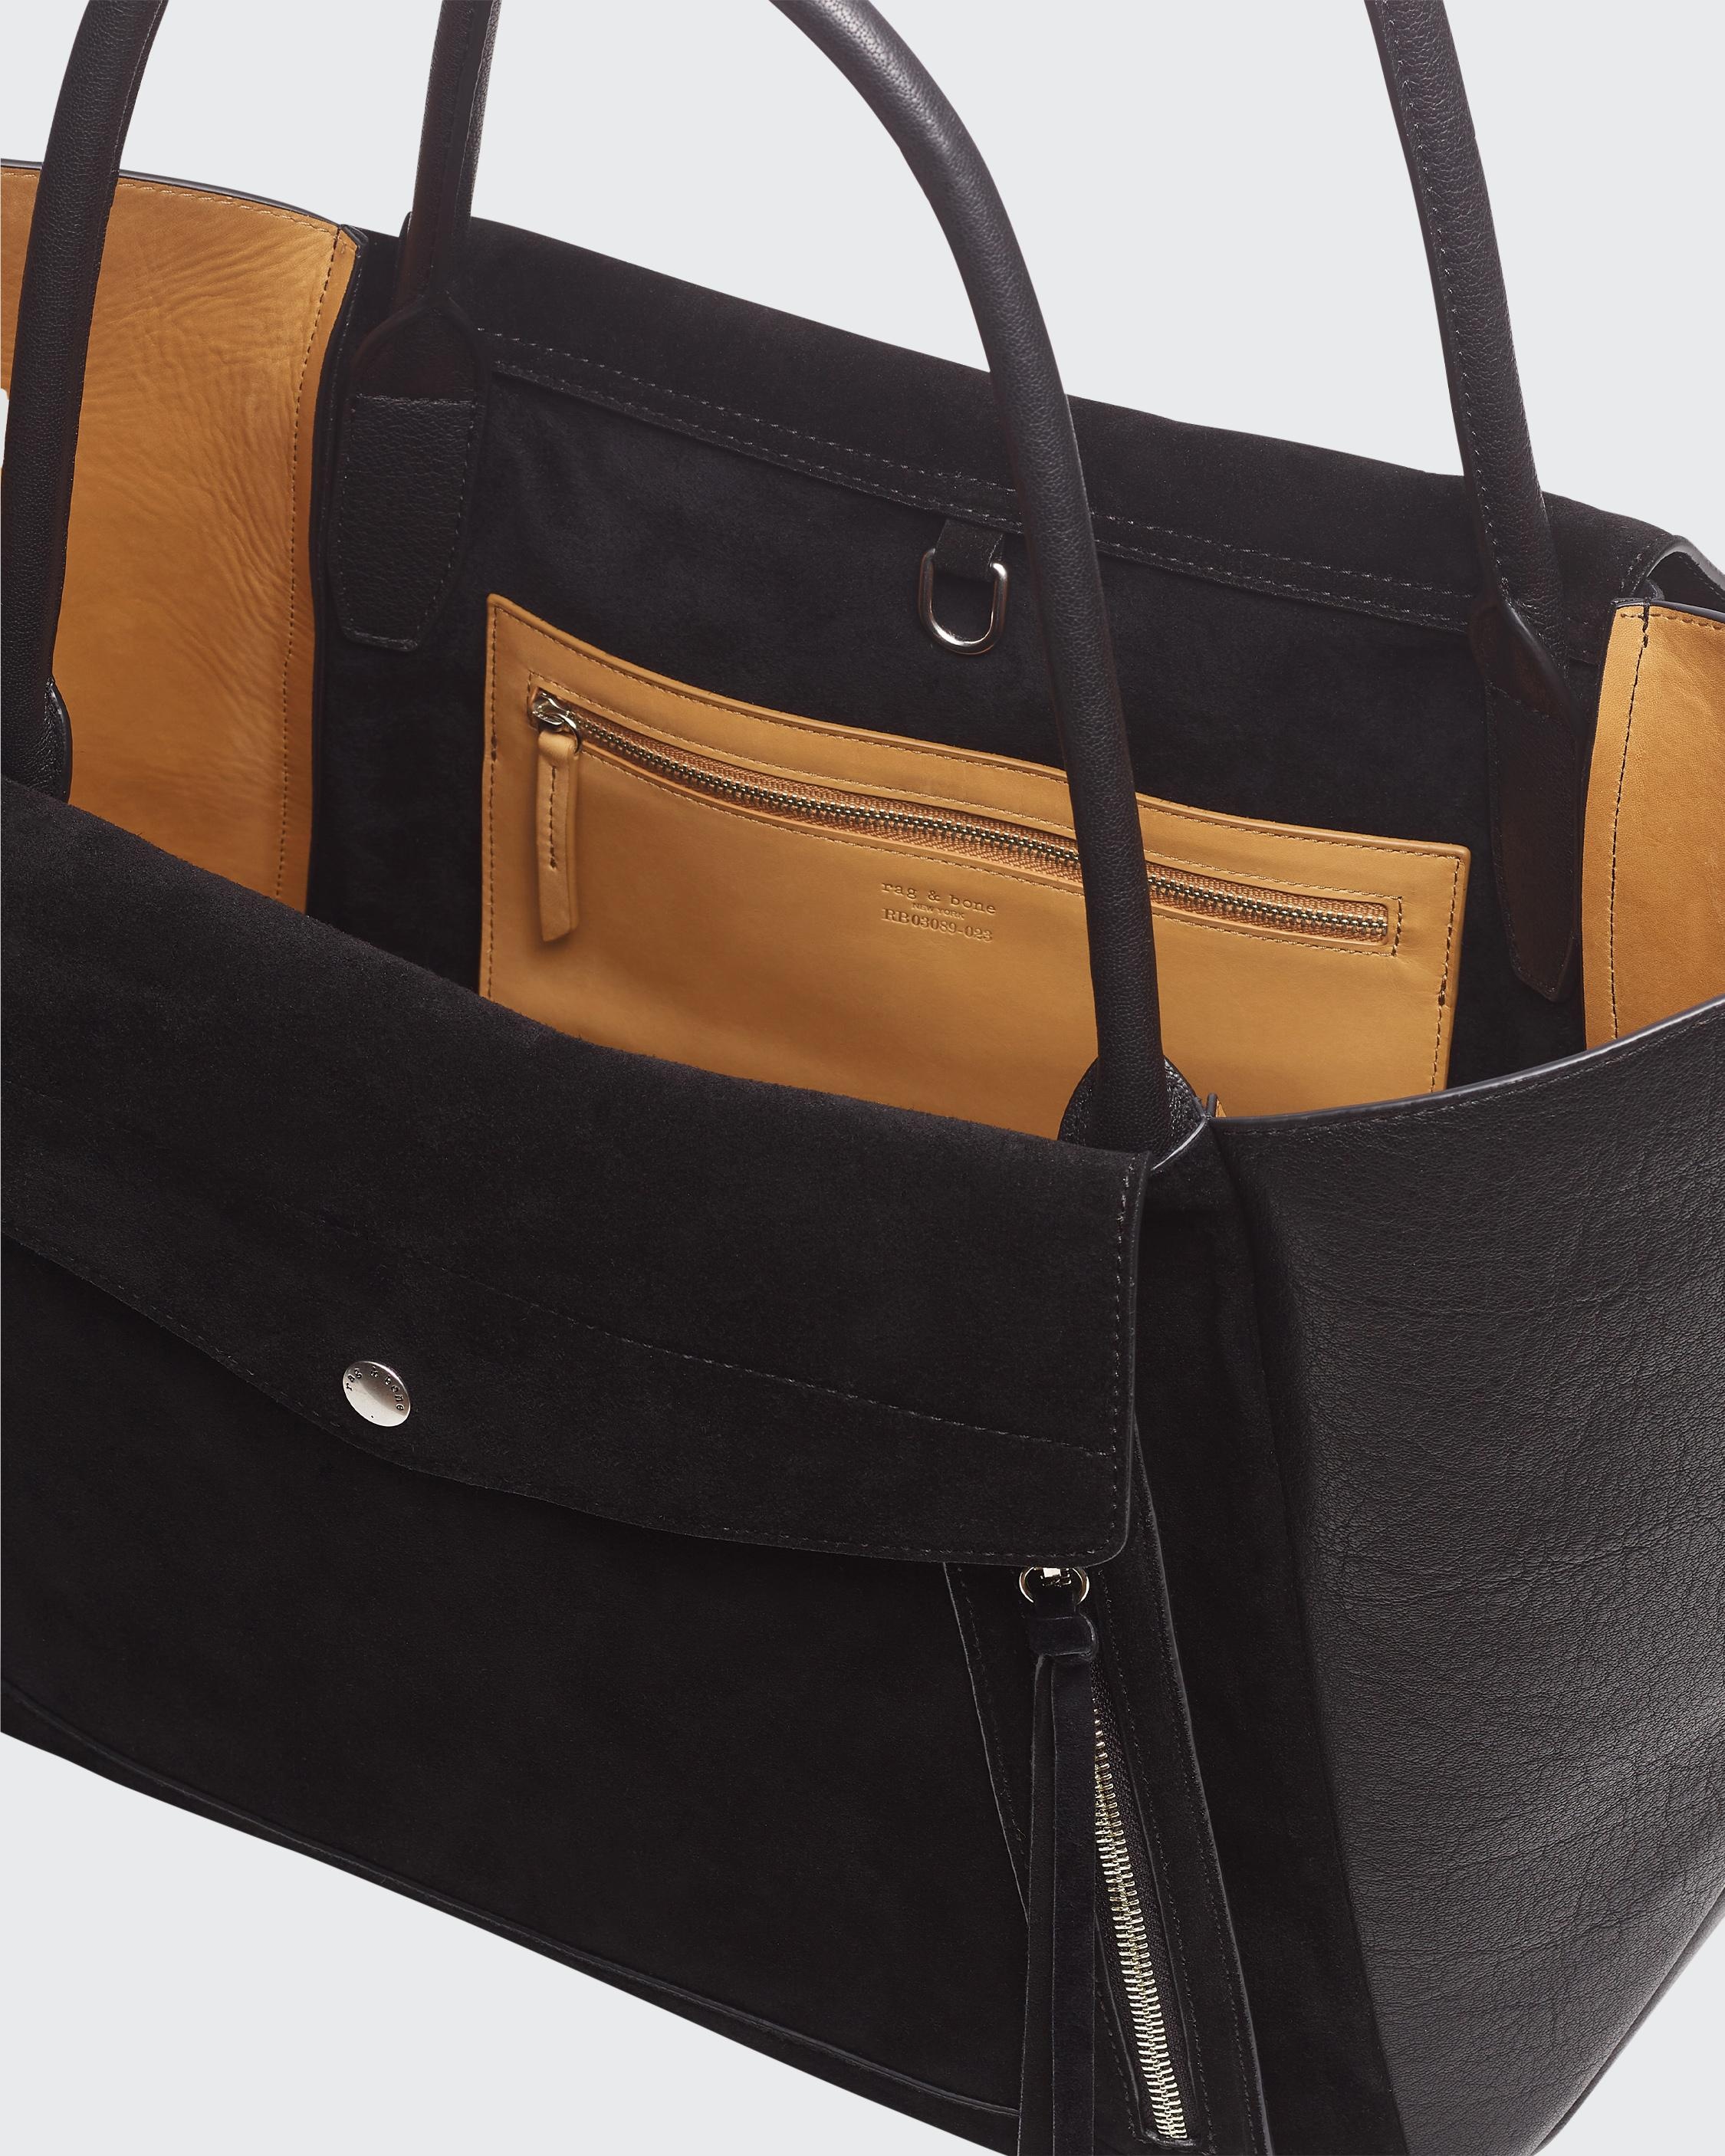 Runner Tote - Suede & Leather
Large Tote Bag - 4